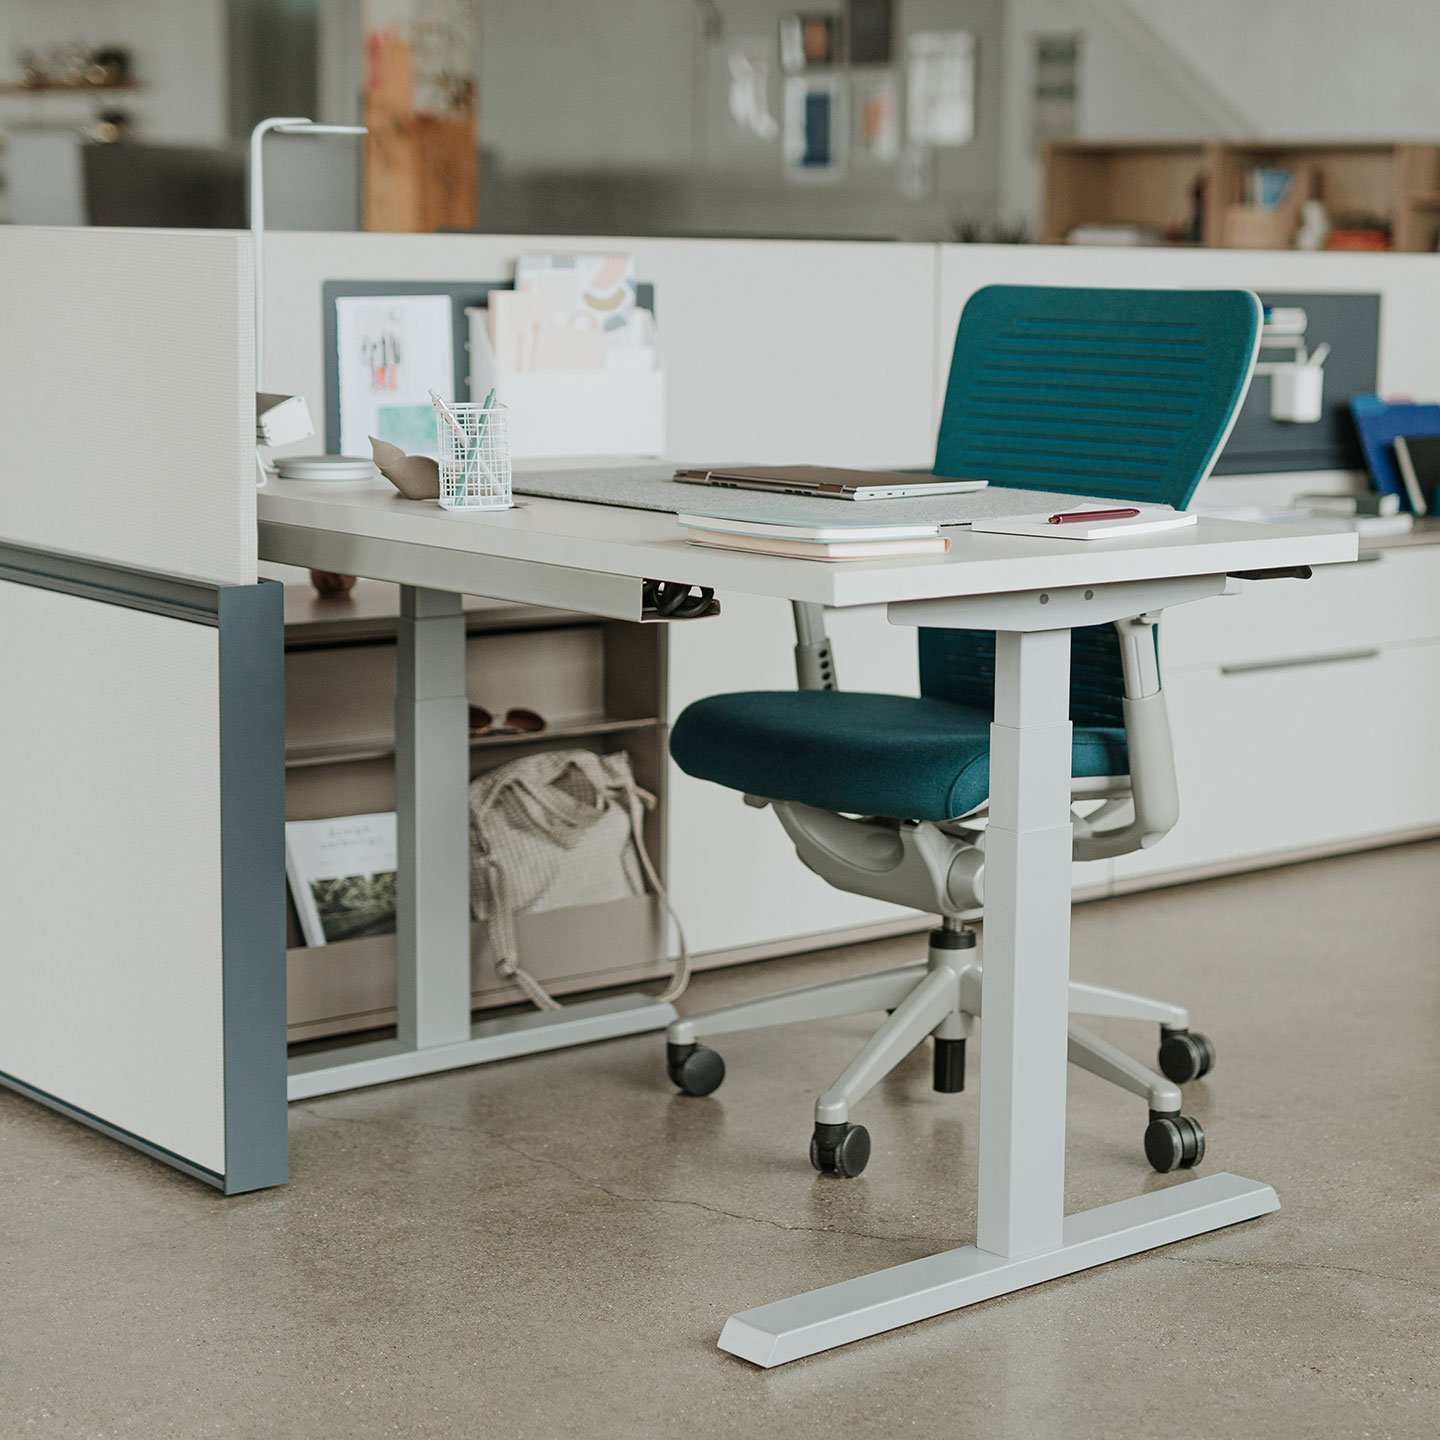 Haworth Upside Height Adjustable Table with chalk top in an office space being used as a desk